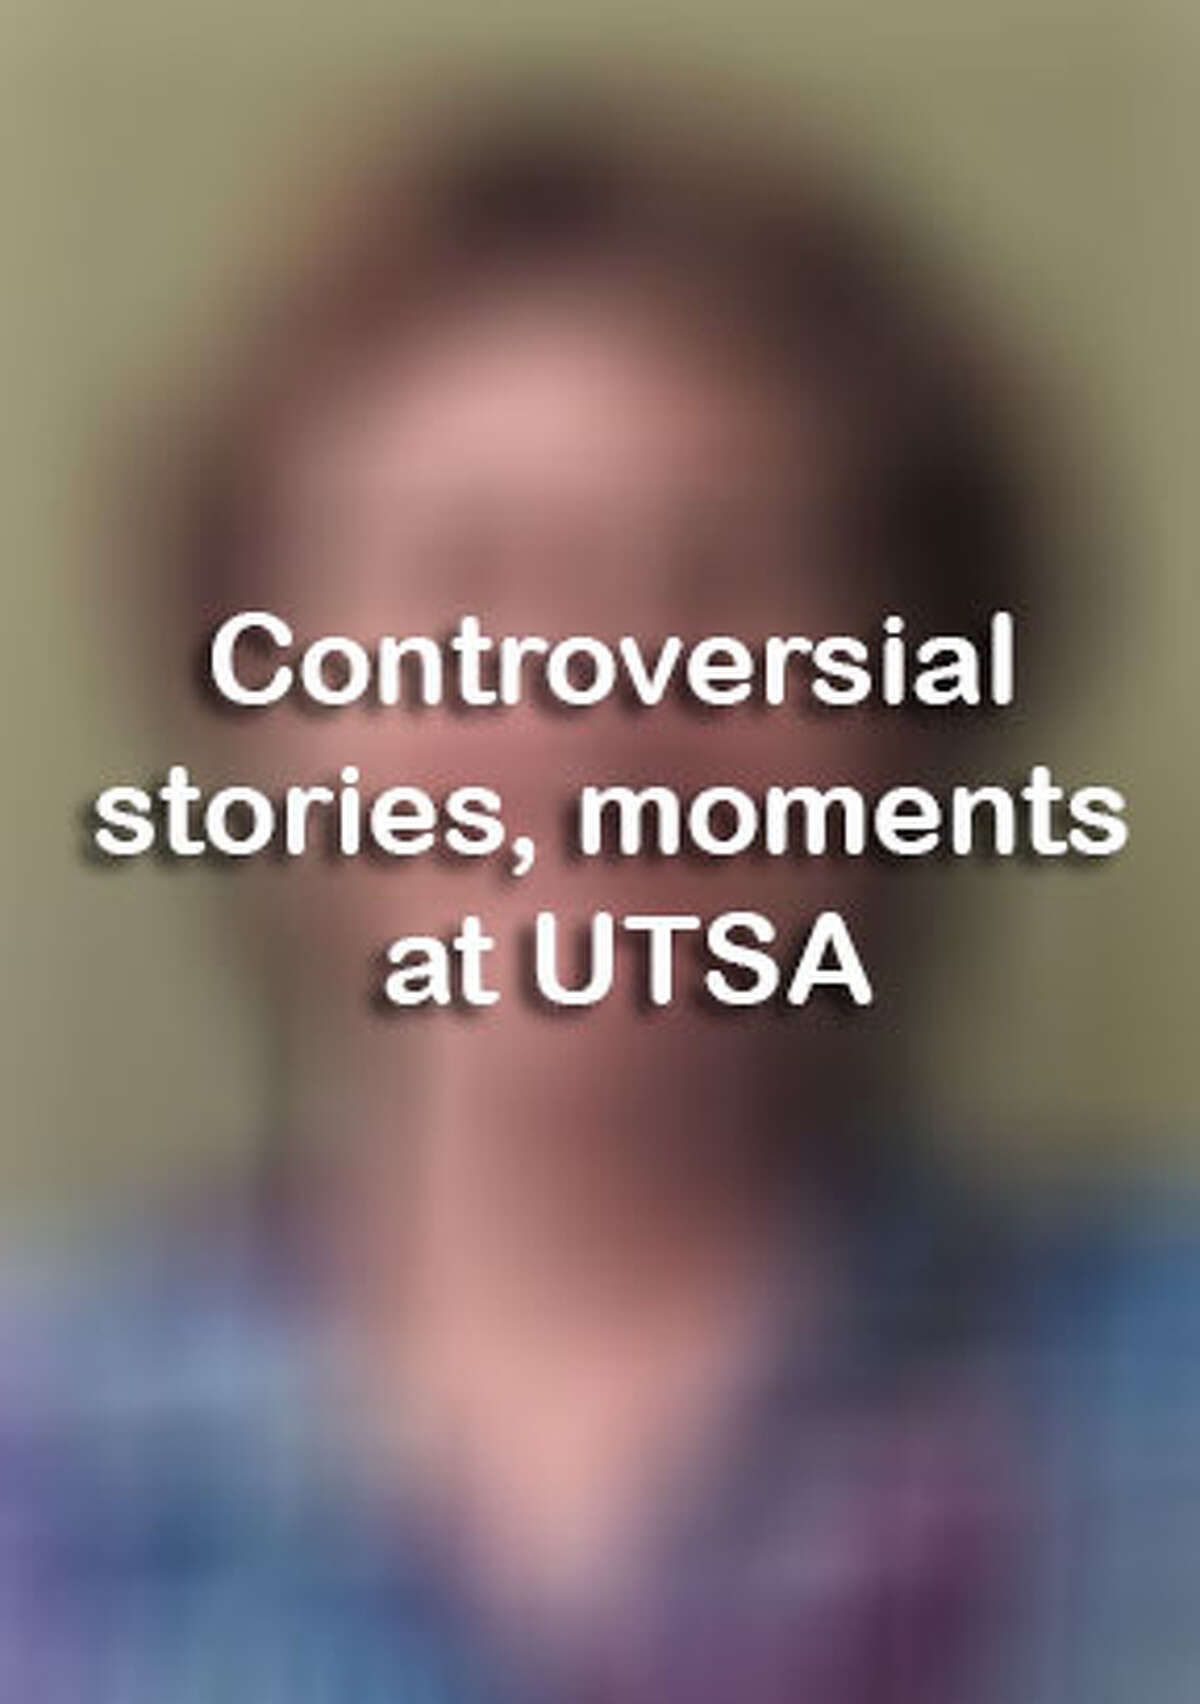 A graphic battle banner, protest and student escort out of class at the University of Texas as San Antonio made headlines this year, but they are the only controversial moments. Click ahead to view other controversies in the news at UTSA.